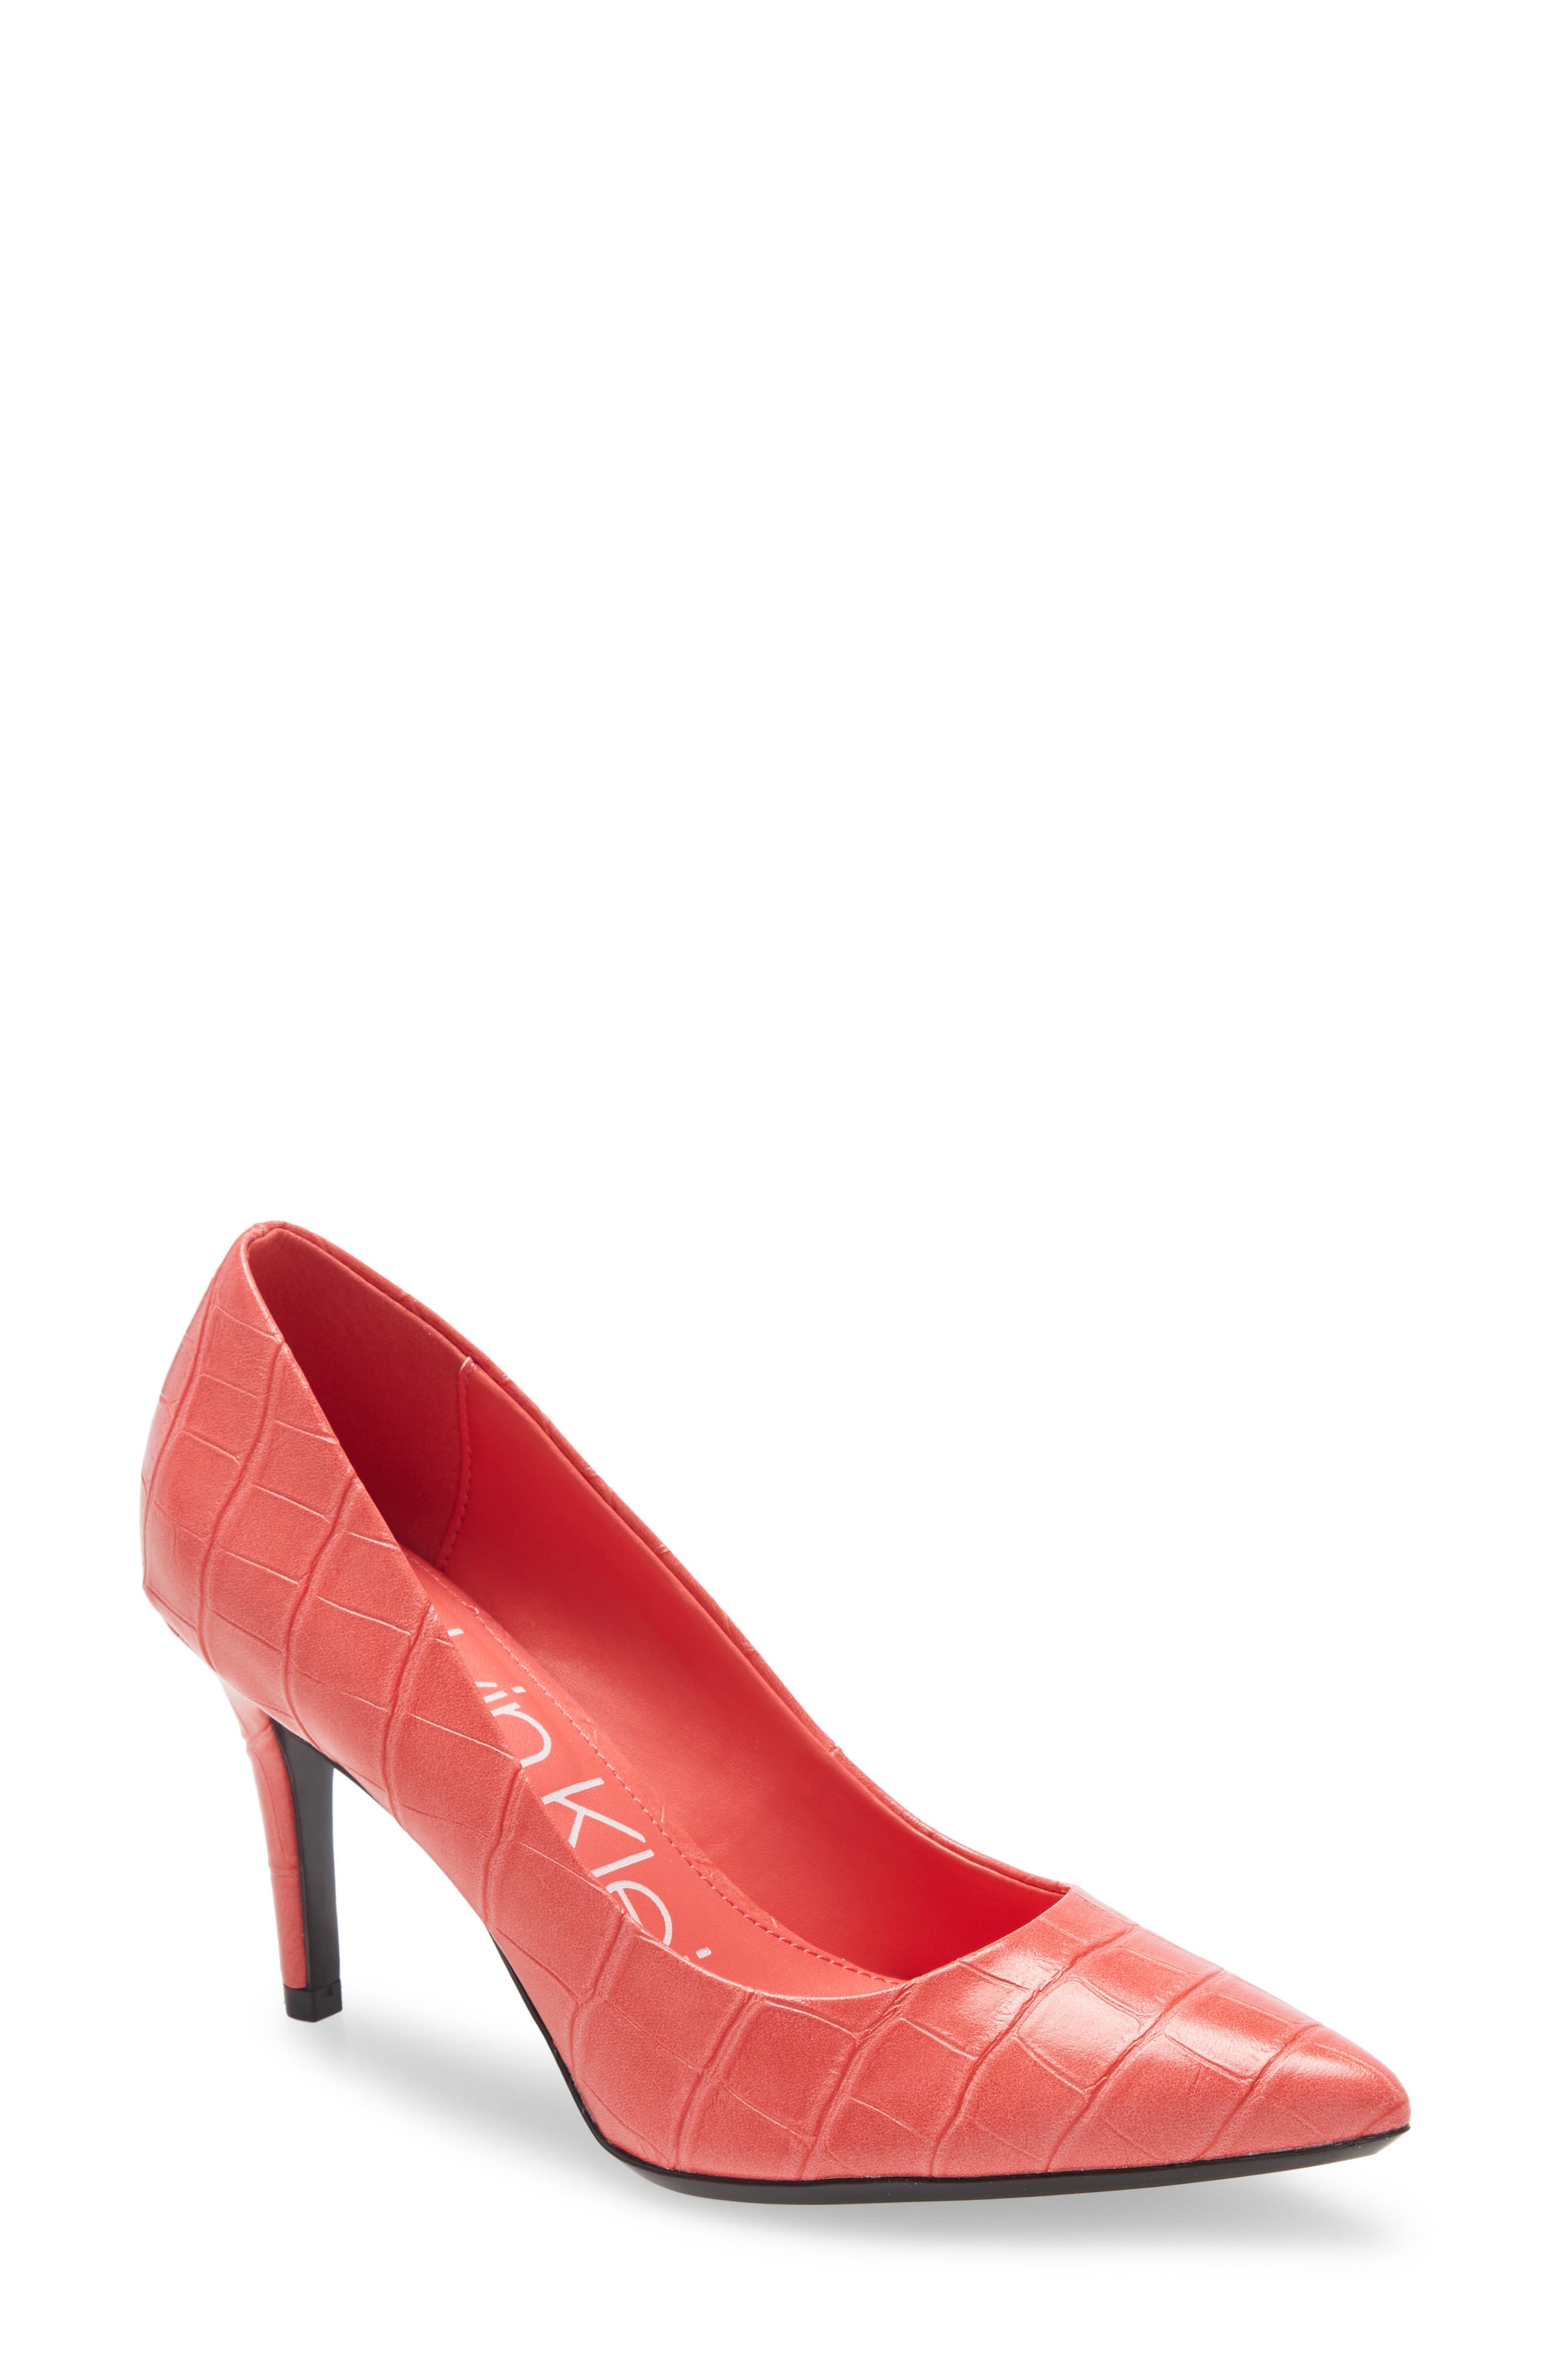 UPC 194060359496 product image for Women's Calvin Klein Gayle Pointed Toe Pump, Size 7 M - Coral | upcitemdb.com